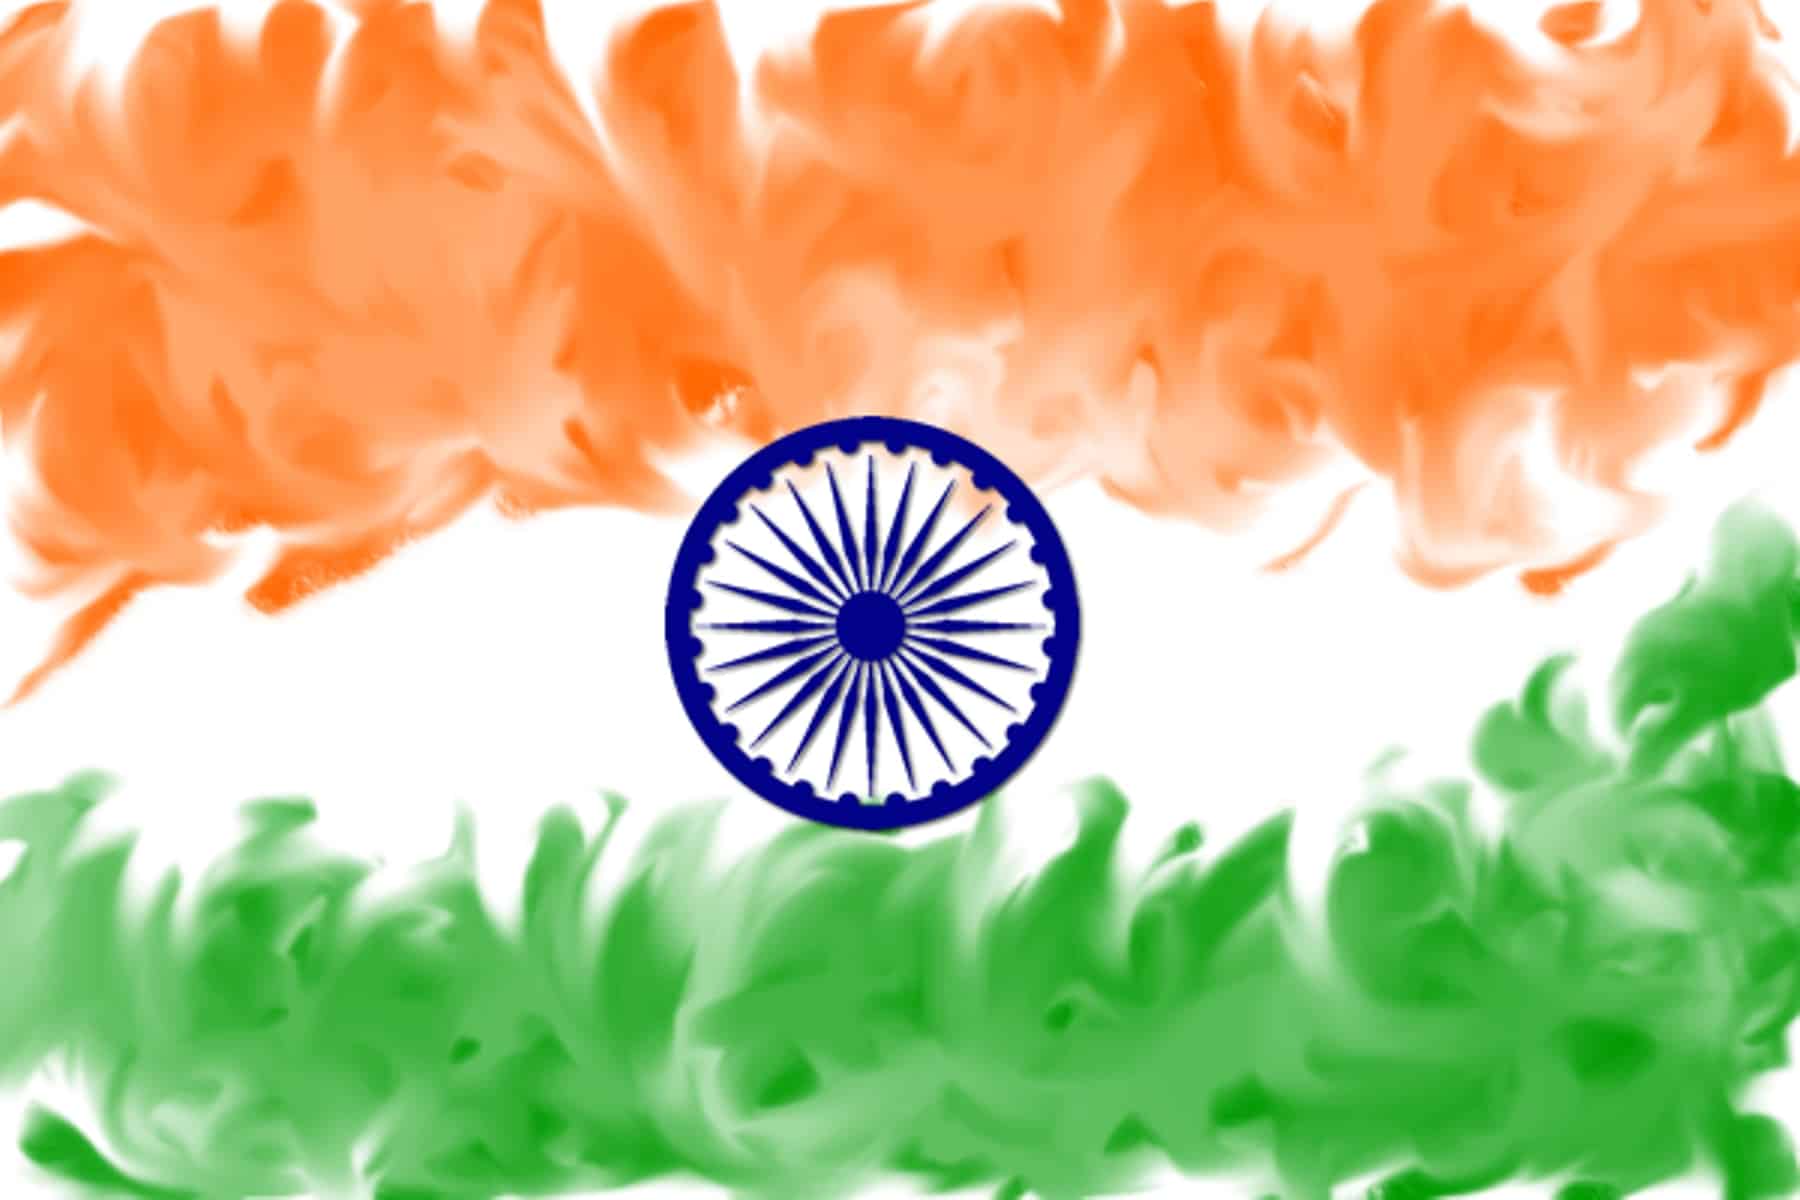 Experience India’s Independence Day